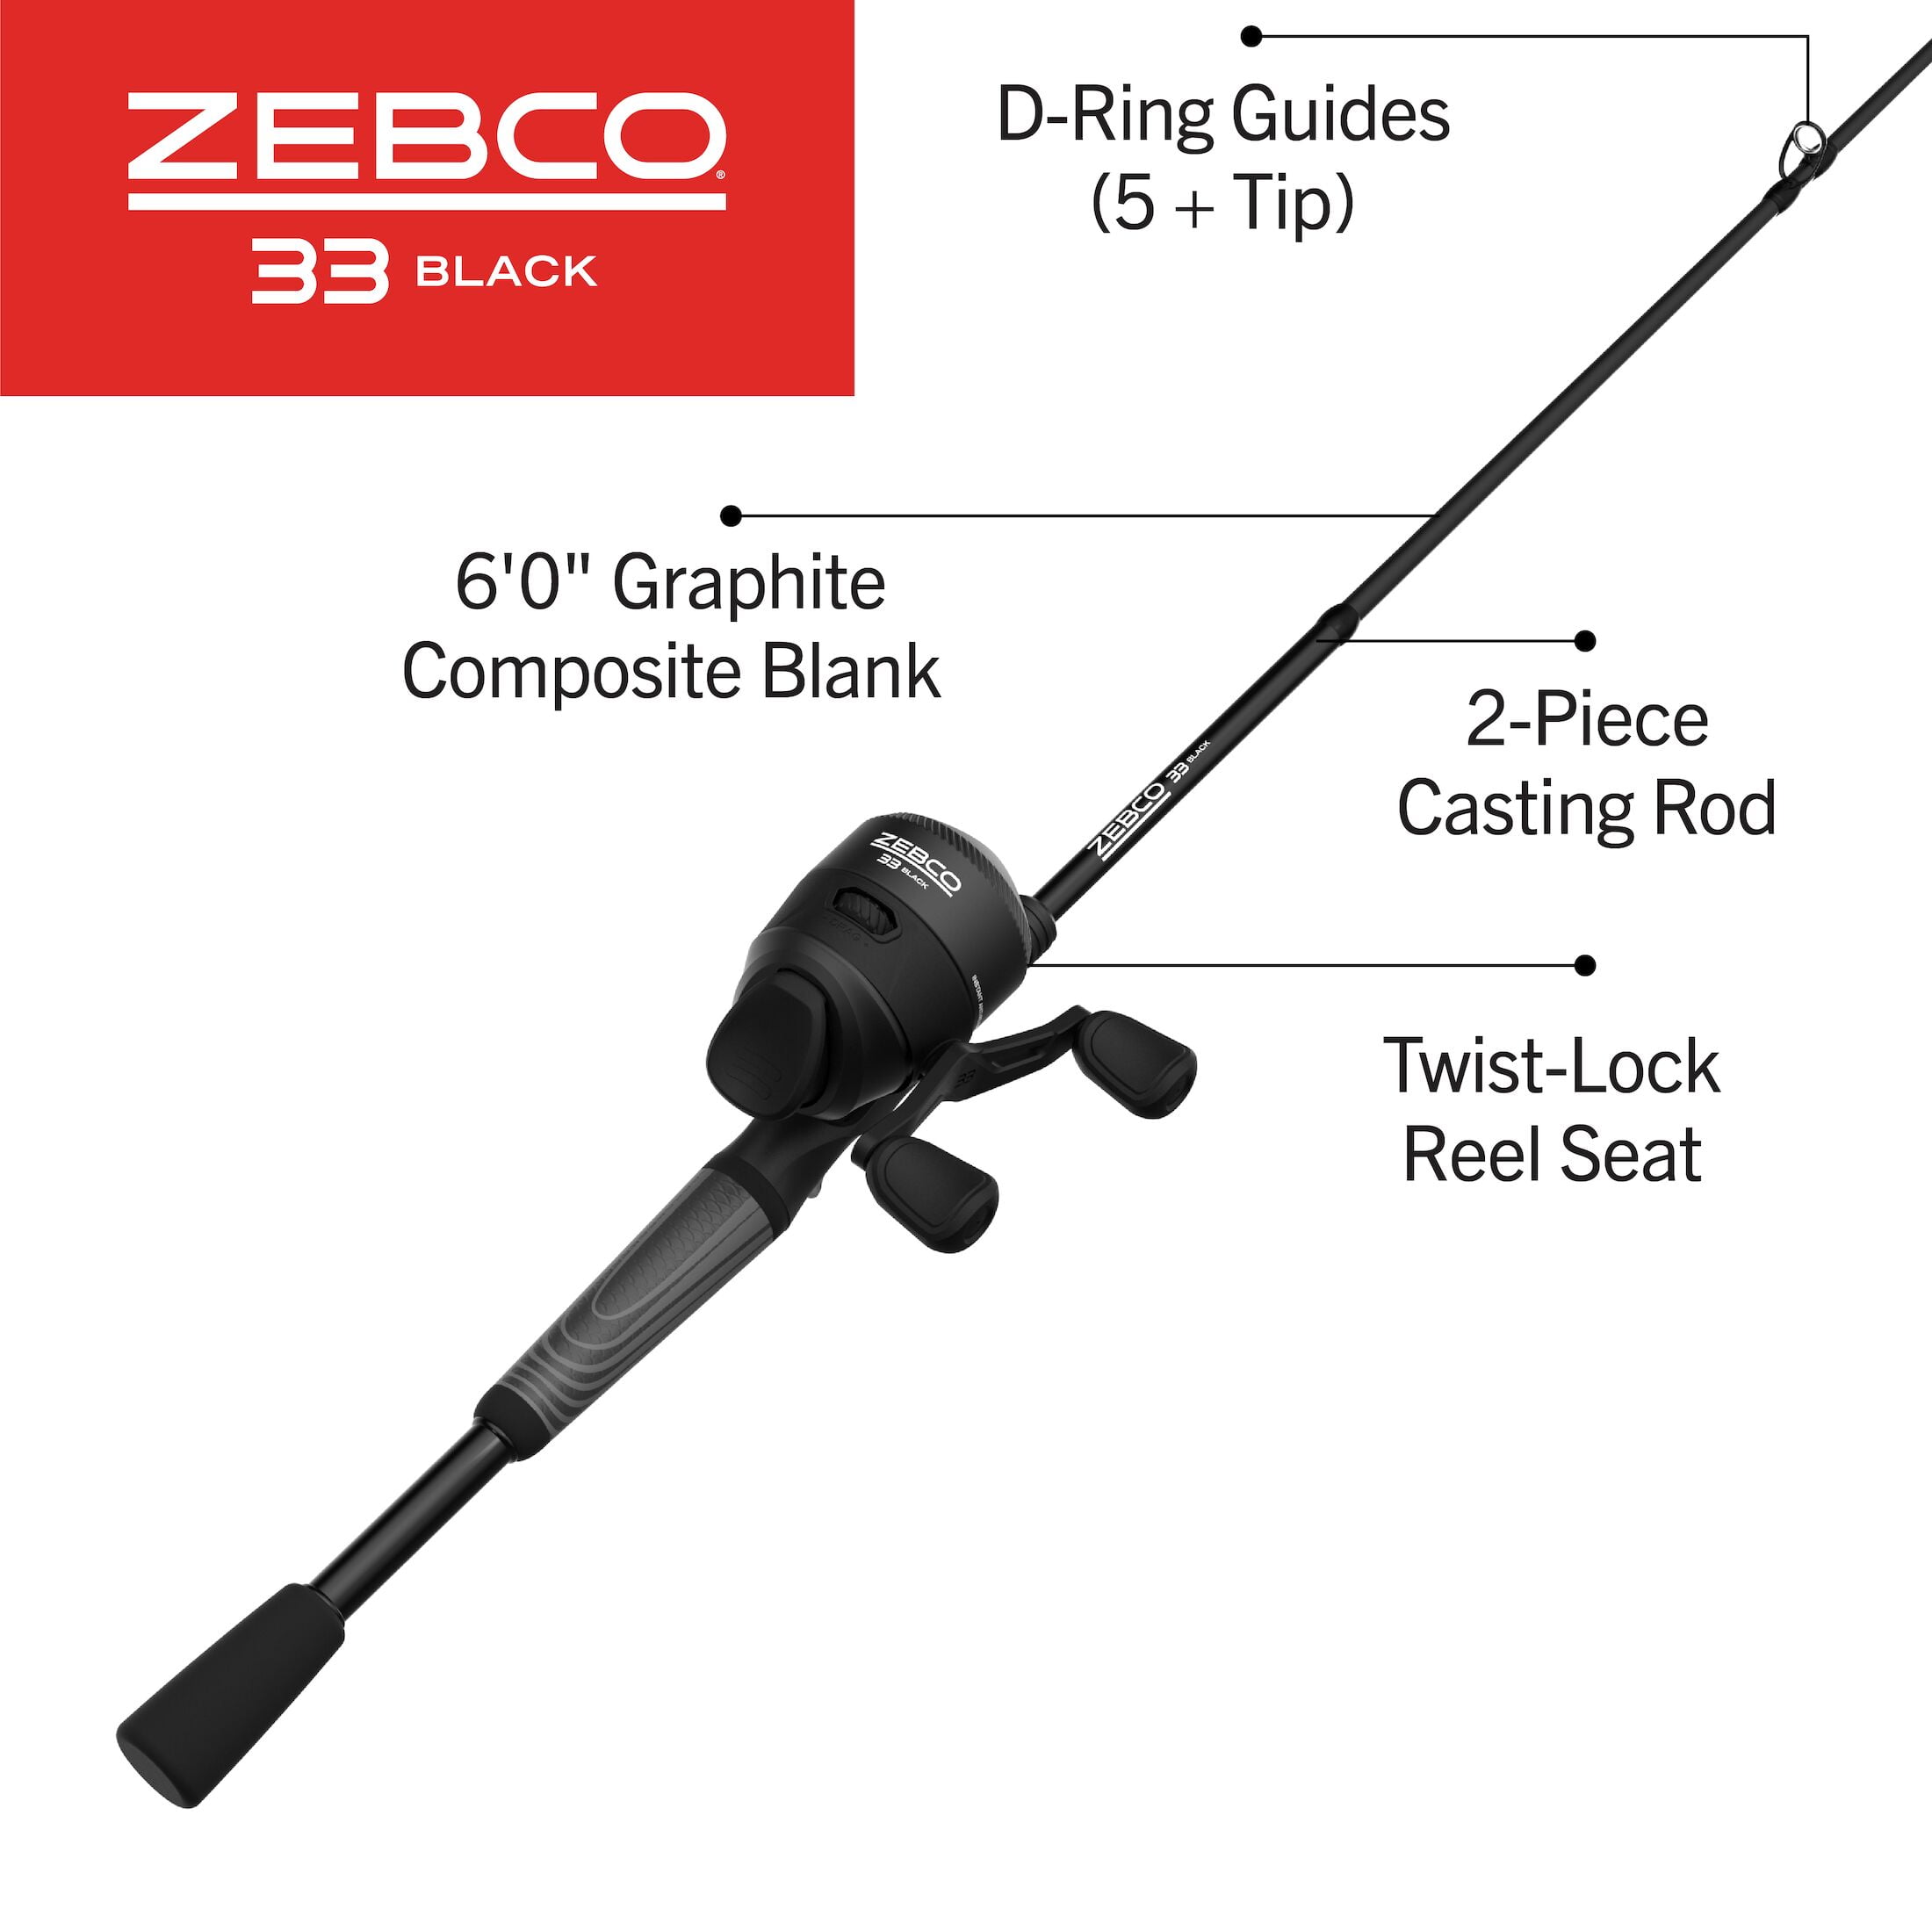 Zebco 33 Black Spincast Reel and Fishing Rod Combo, 6-Foot 2-Piece